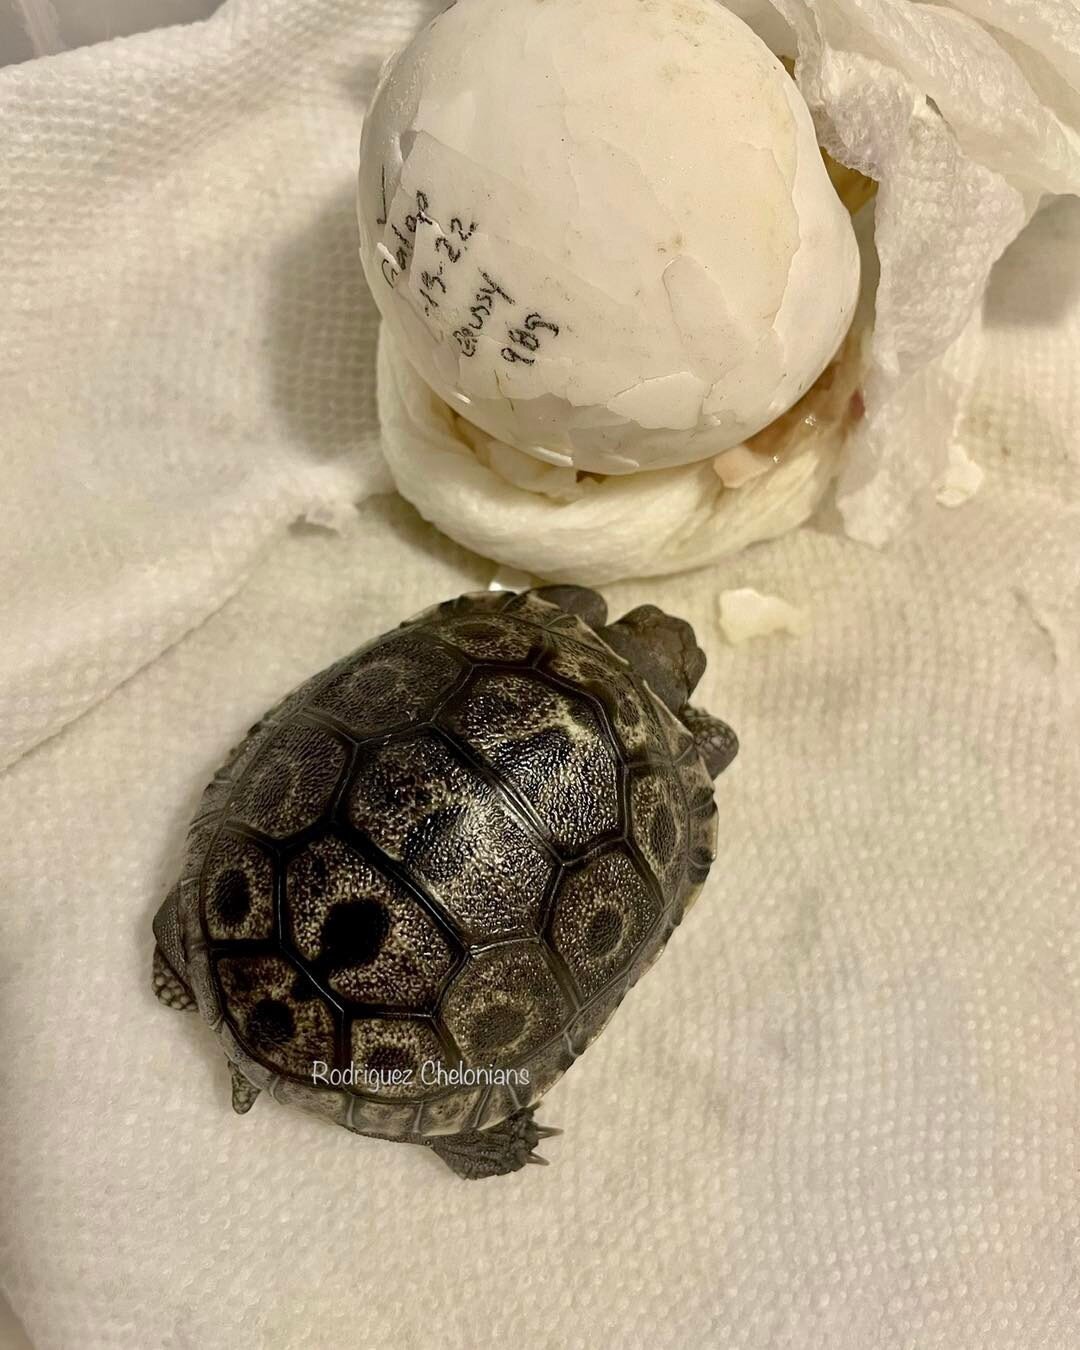 Say hello to the first Galapagos hatchling of the year!!!! With only a handful of breeders in the US and no others in the state of California we are very excited for the opportunity to share this amazing species with others. 
*
*
*
#galapagos #galapa